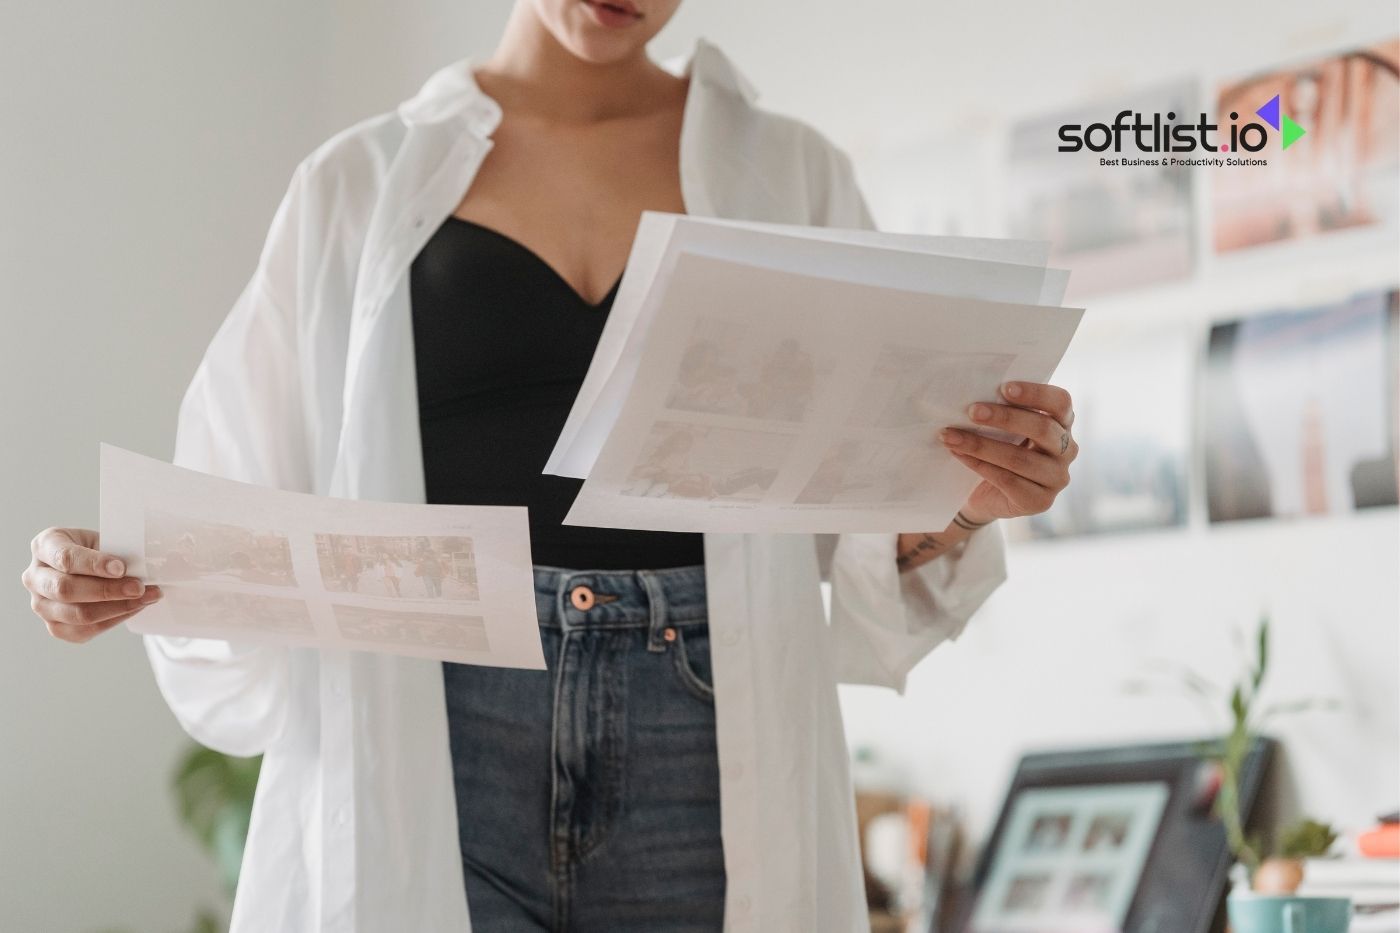 Woman examining printouts with softlist.io logo in a bright office